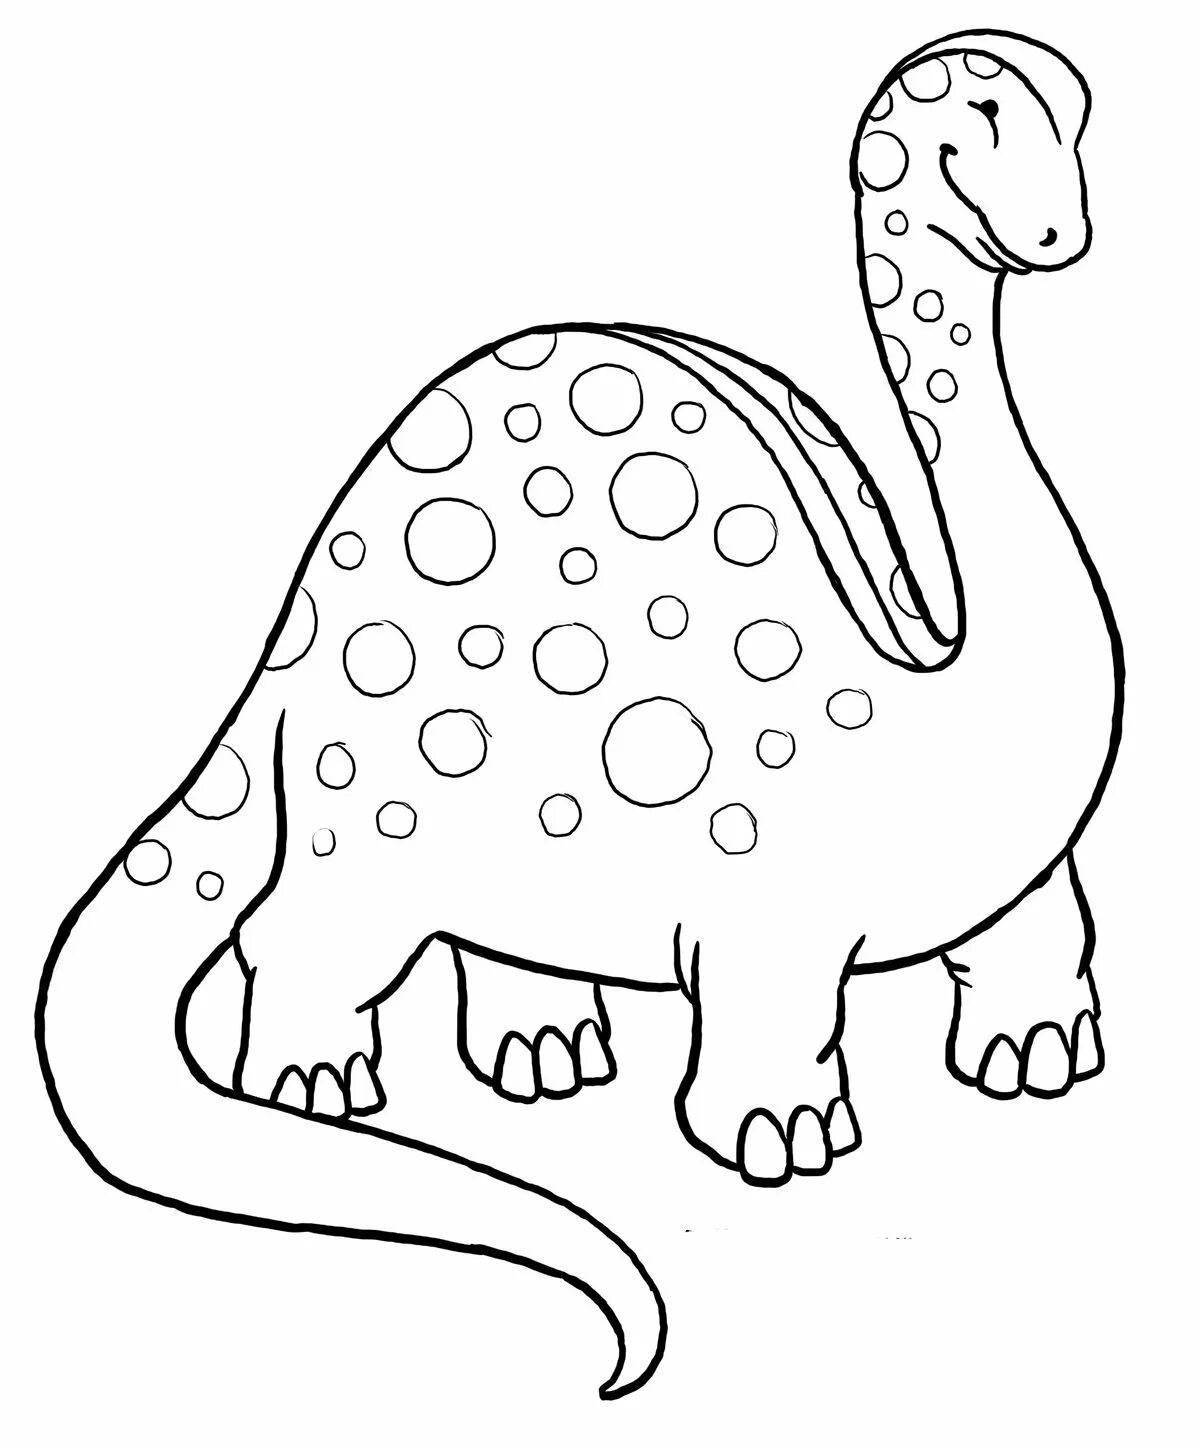 Naughty dinosaur coloring pages for kids